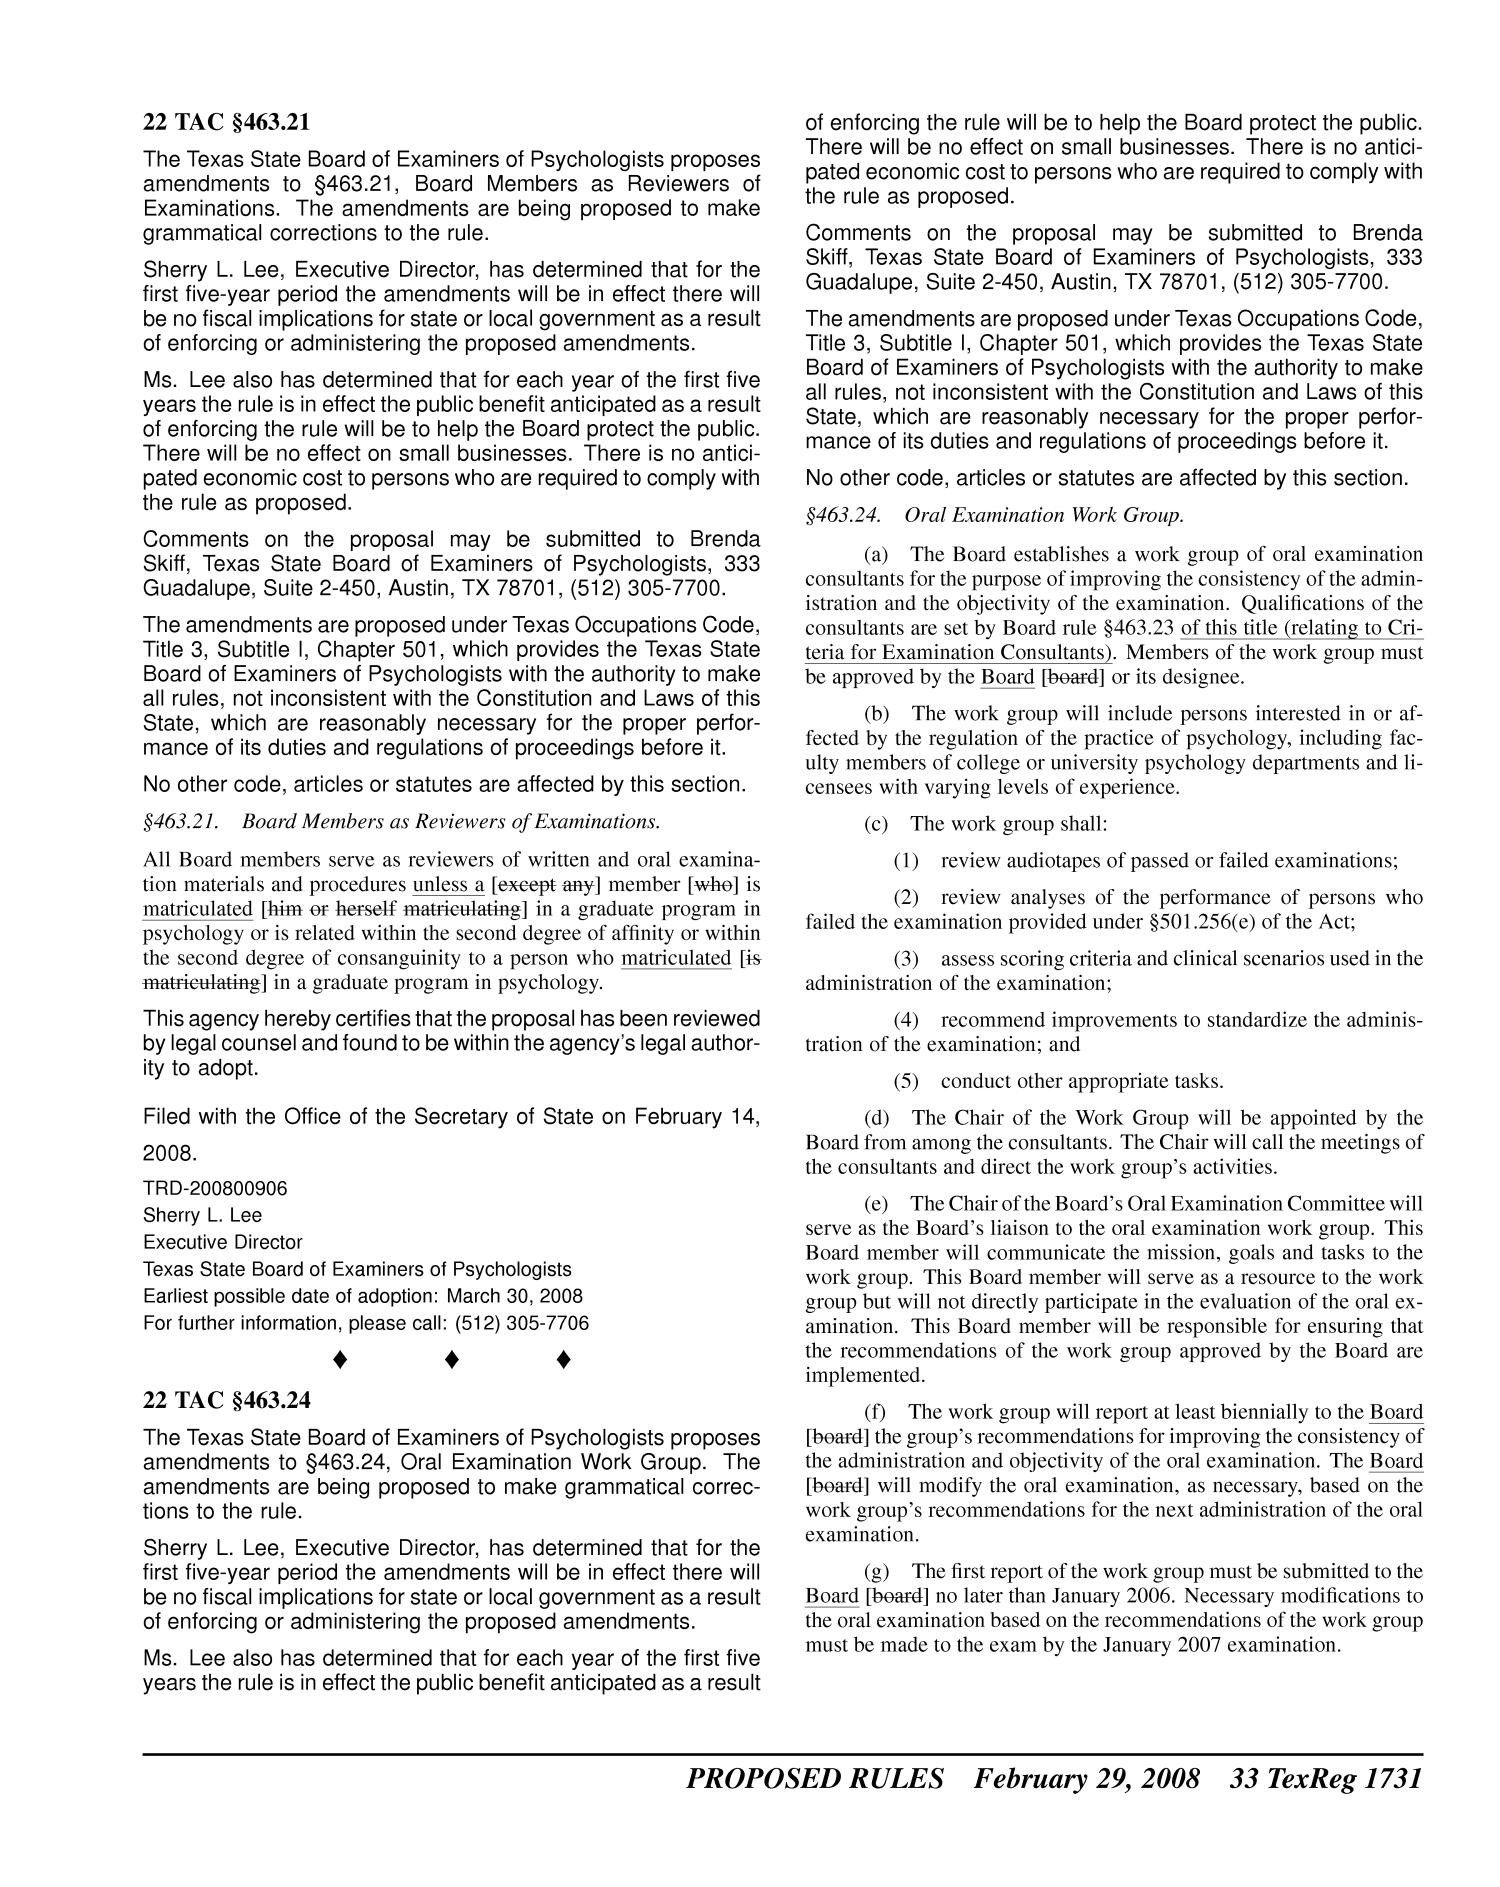 Texas Register, Volume 33, Number 9, Pages 1657-1906, February 29, 2008
                                                
                                                    1731
                                                